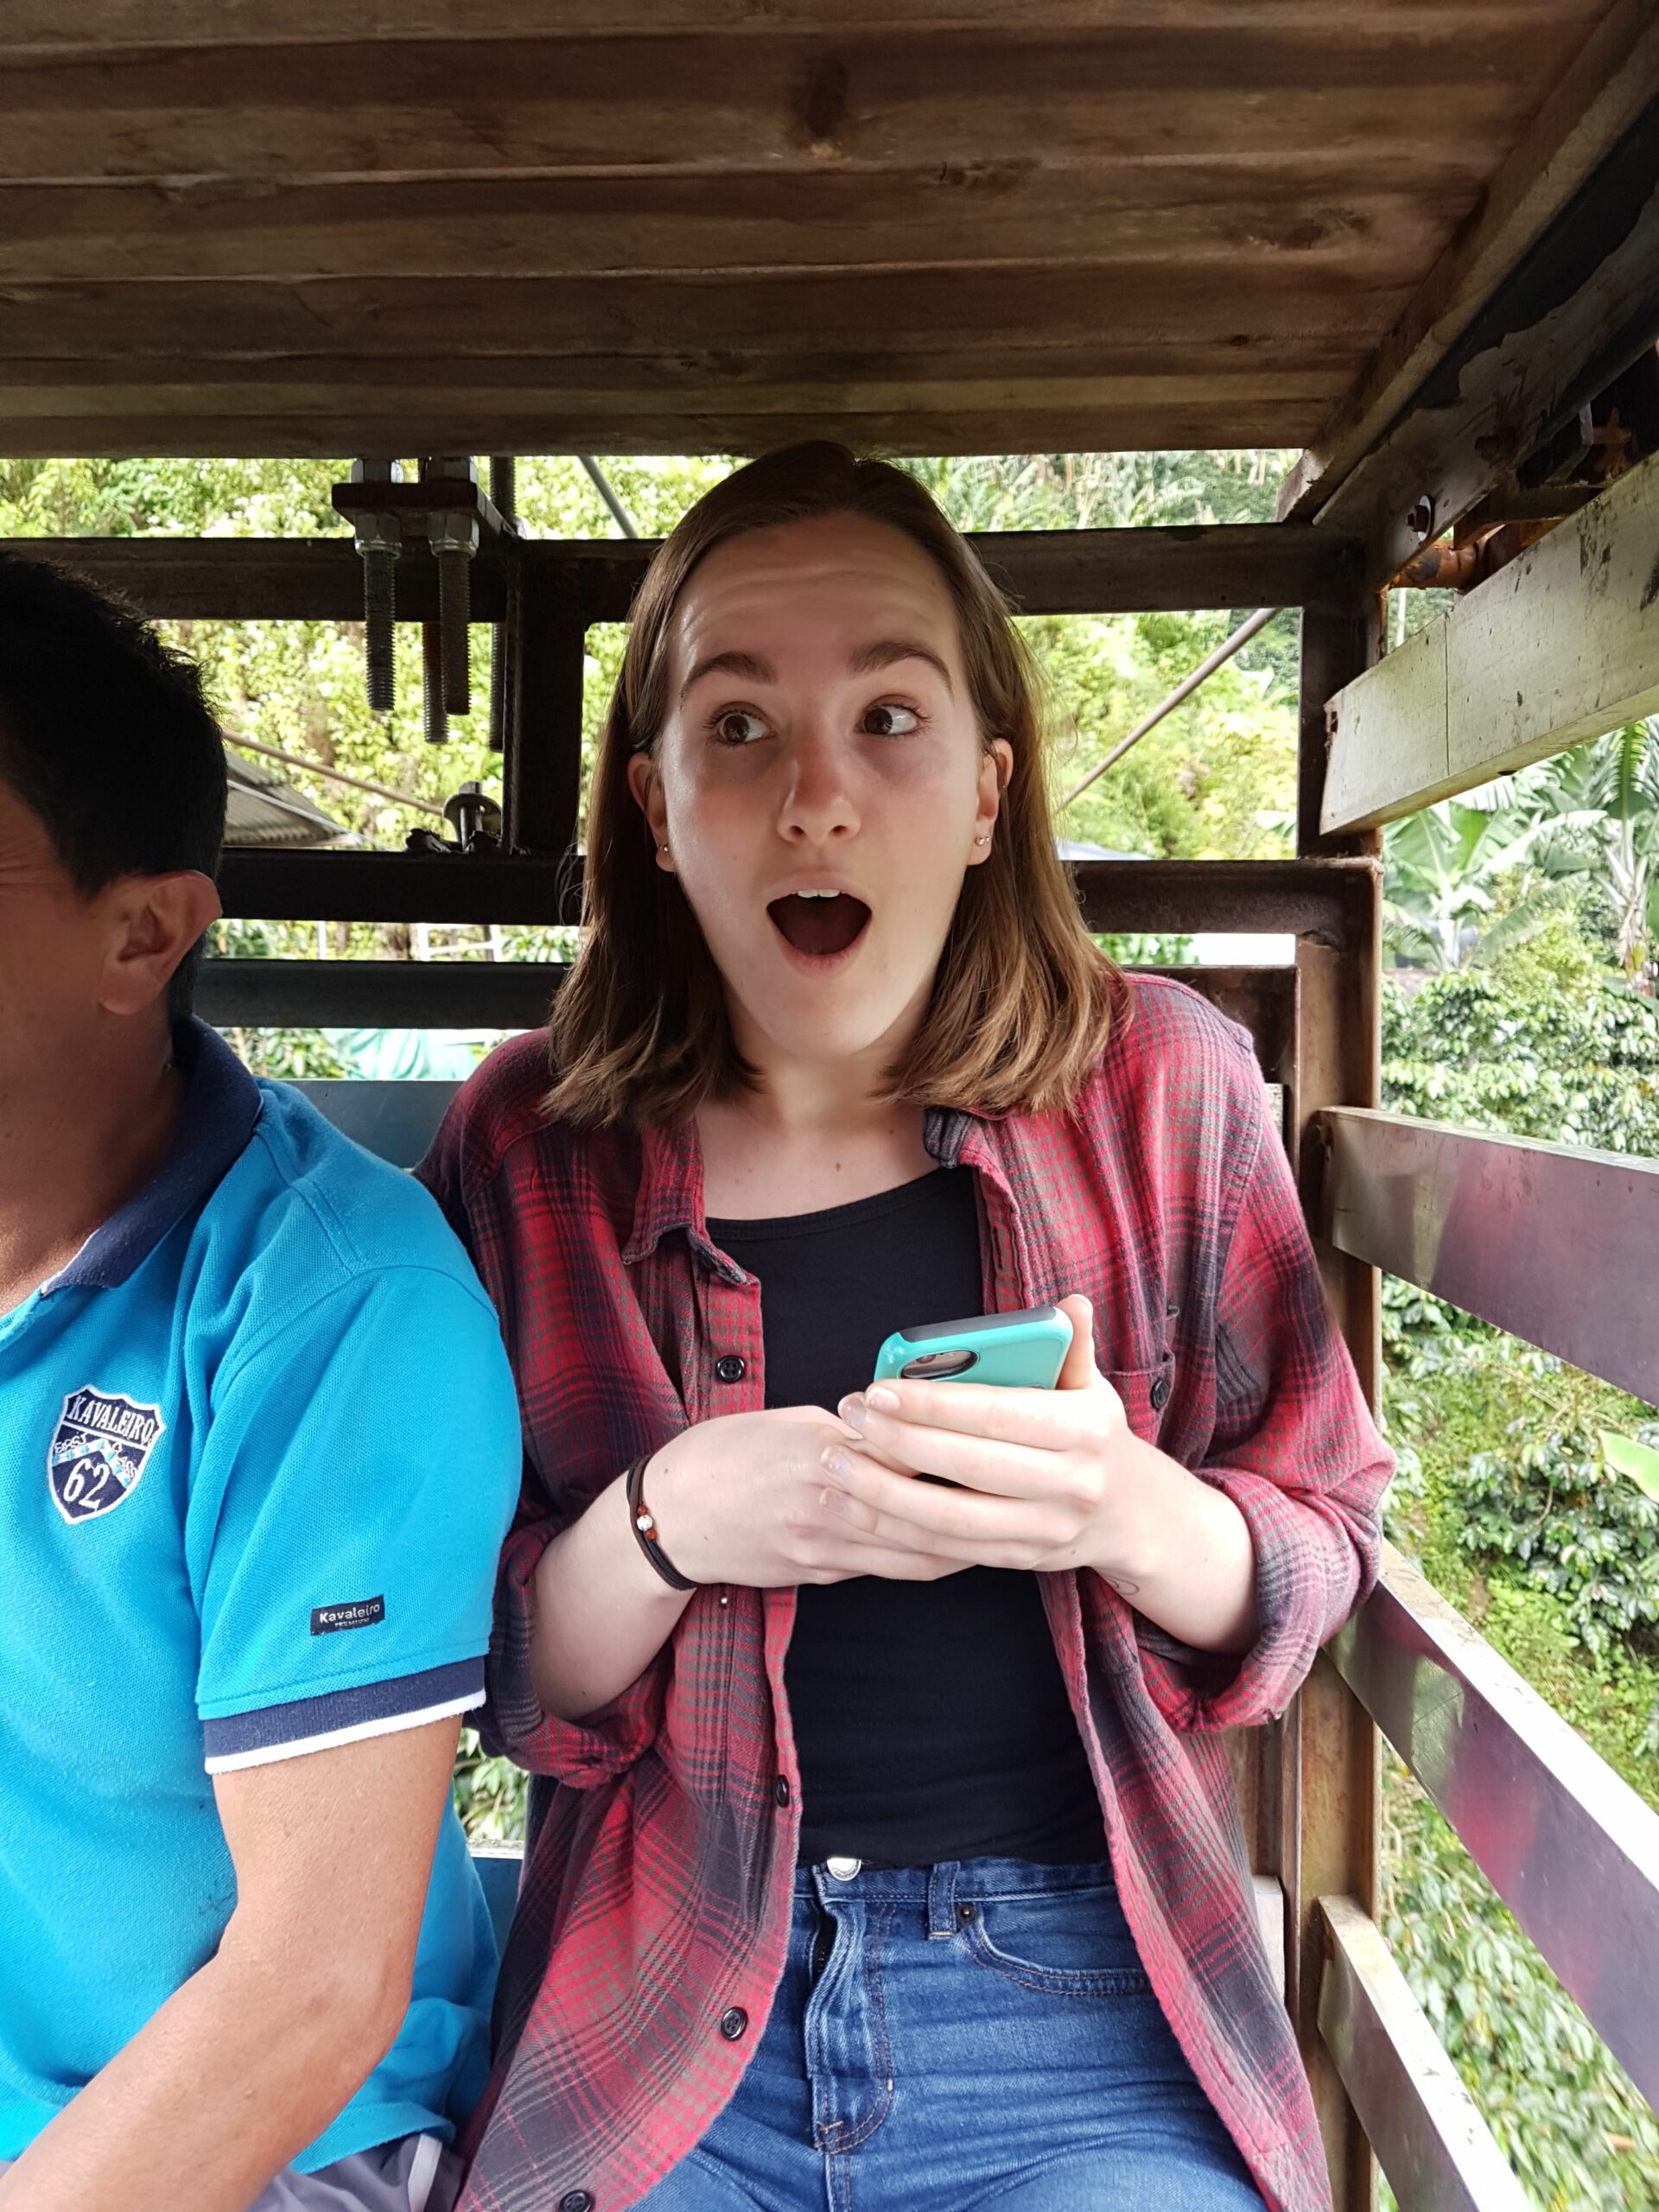 Surprised Traveler riding on the Garrucha (wooden cable car) in Jardin Colombia